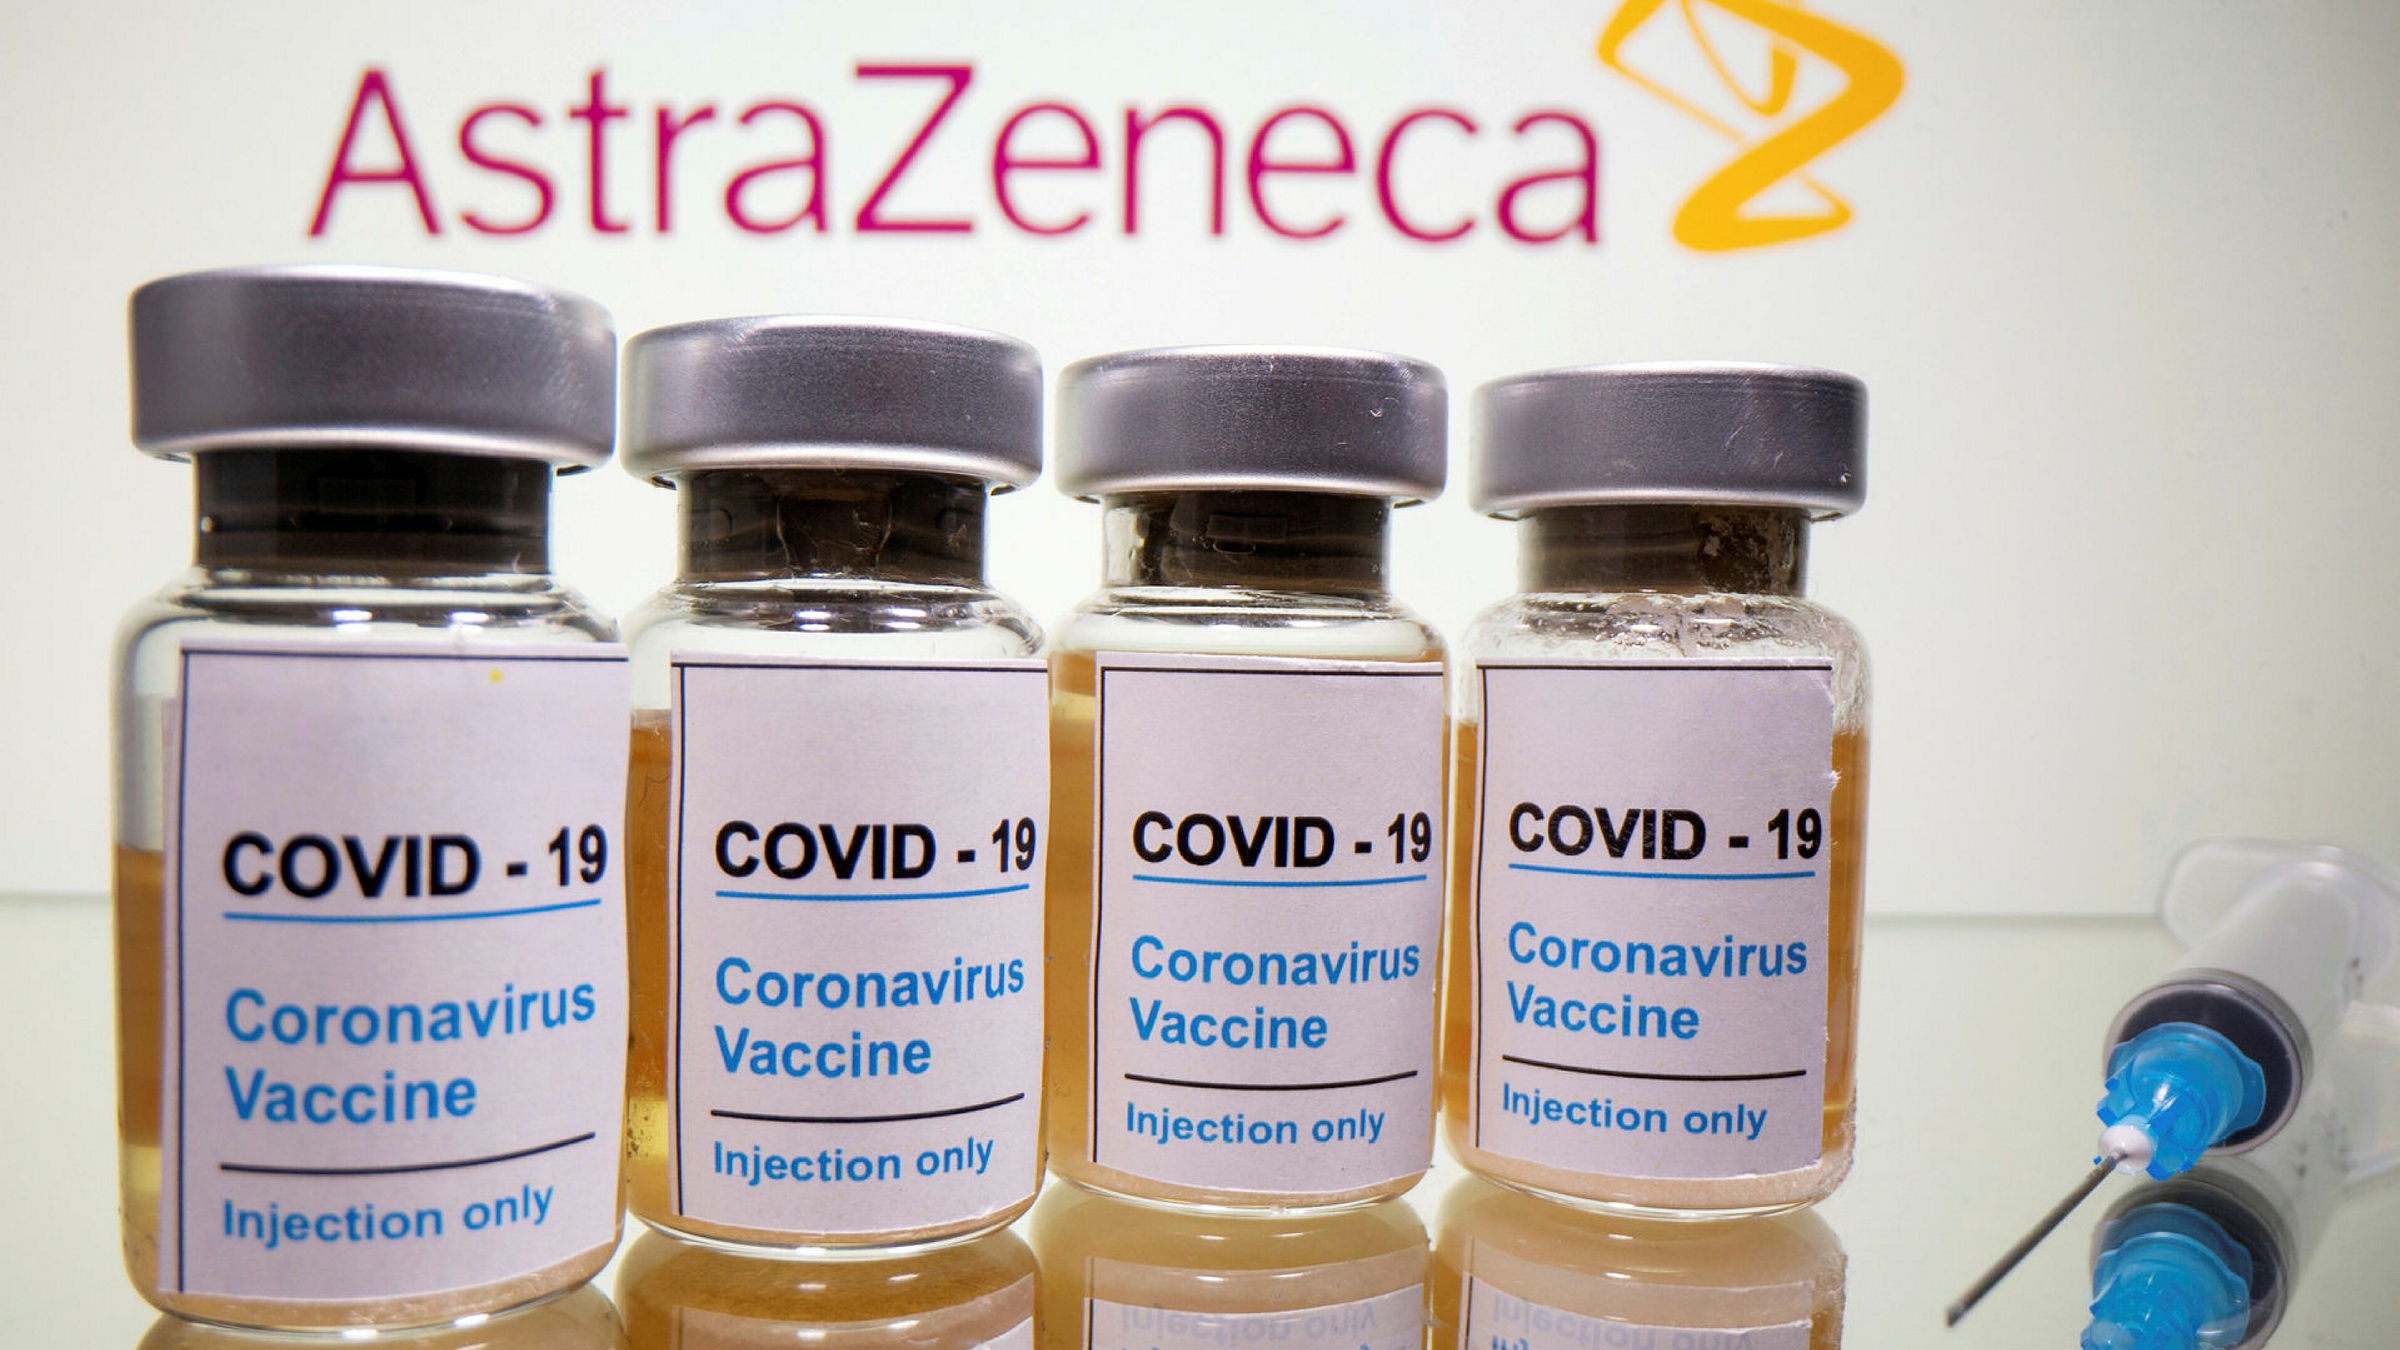 How AstraZeneca and Oxford found their vaccine under fire | Financial Times